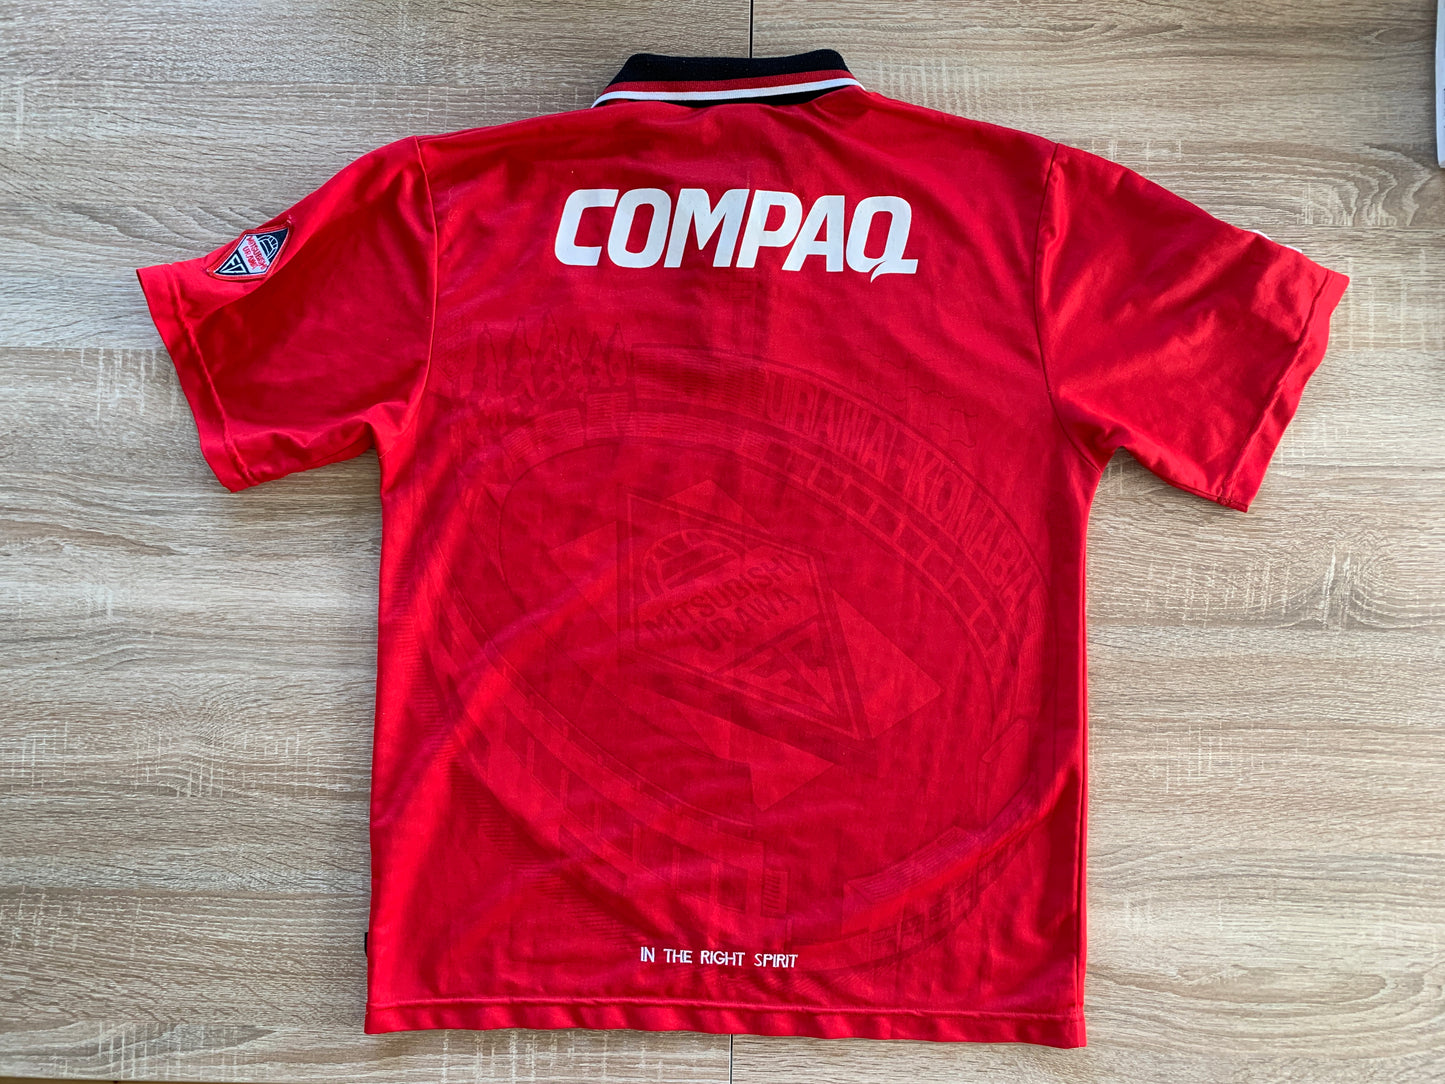 Urawa Red Diamonds Home Shirt from 1997: The iconic home jersey worn by Urawa Red Diamonds during the 1997 season. Featuring the club's emblem, it signifies a memorable era in the team's history and the dedication of their fans.